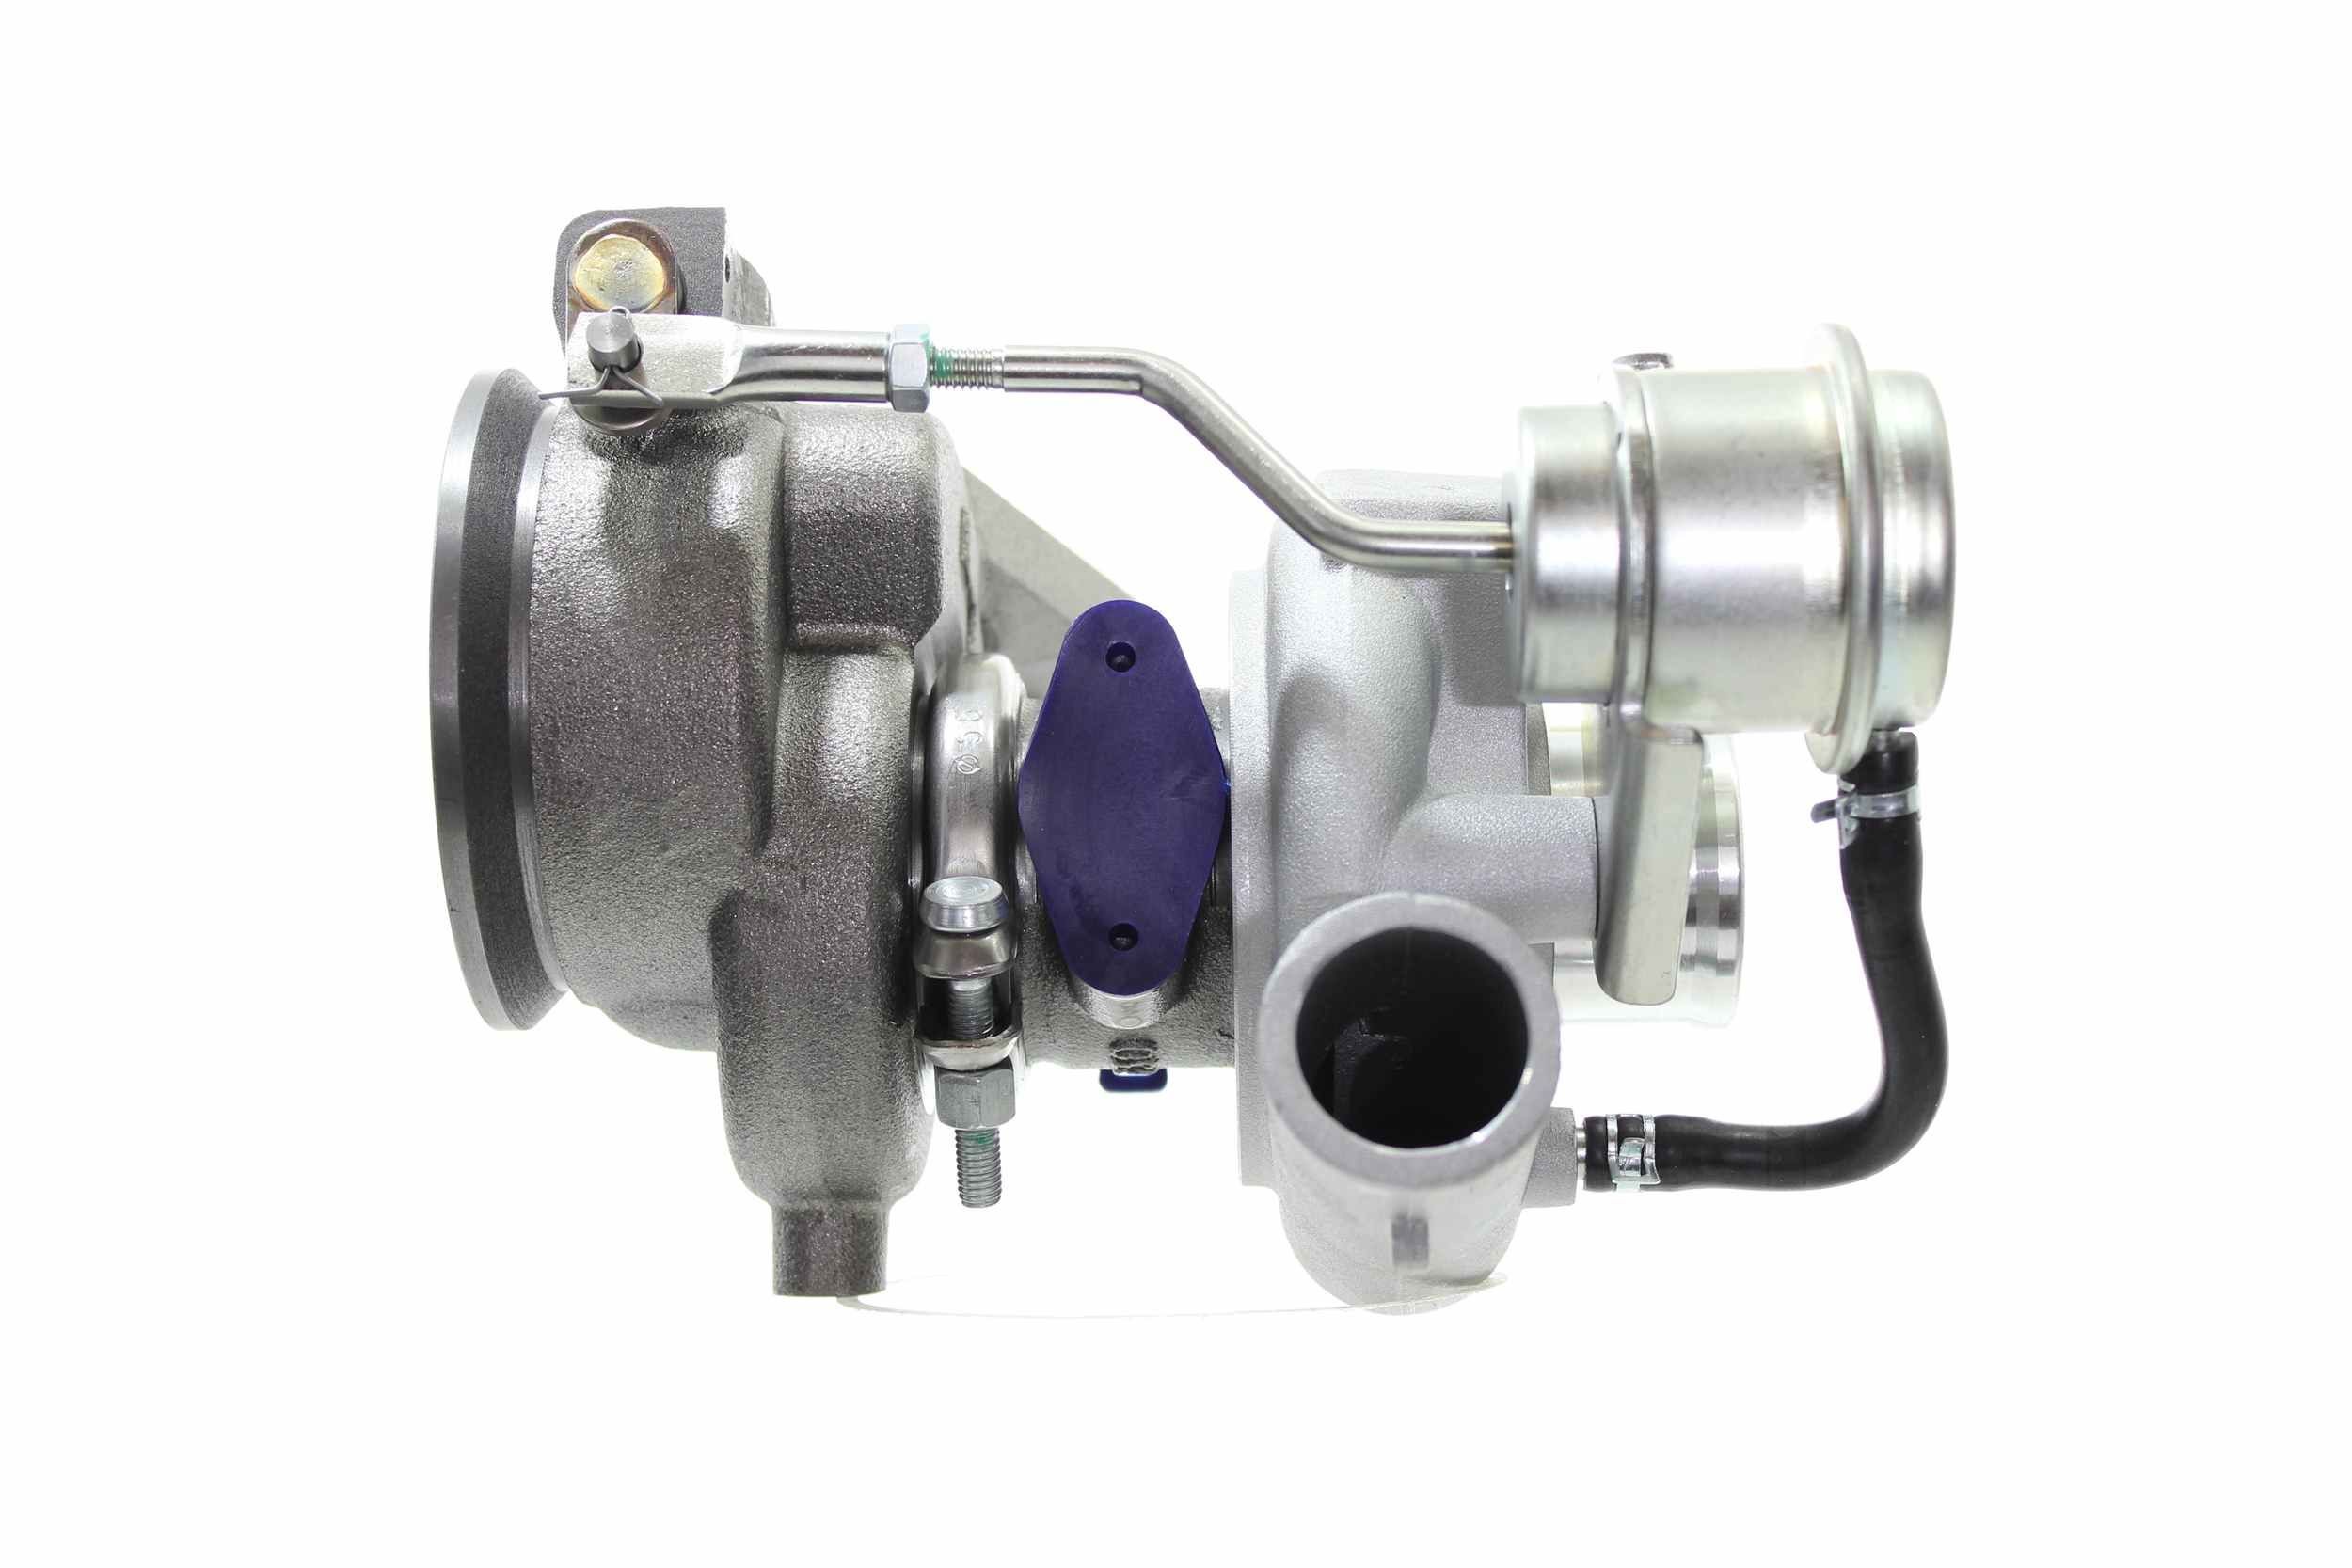 10900950 Turbocharger 0375K7 ALANKO Exhaust Turbocharger, Incl. Gasket Set, with attachment material